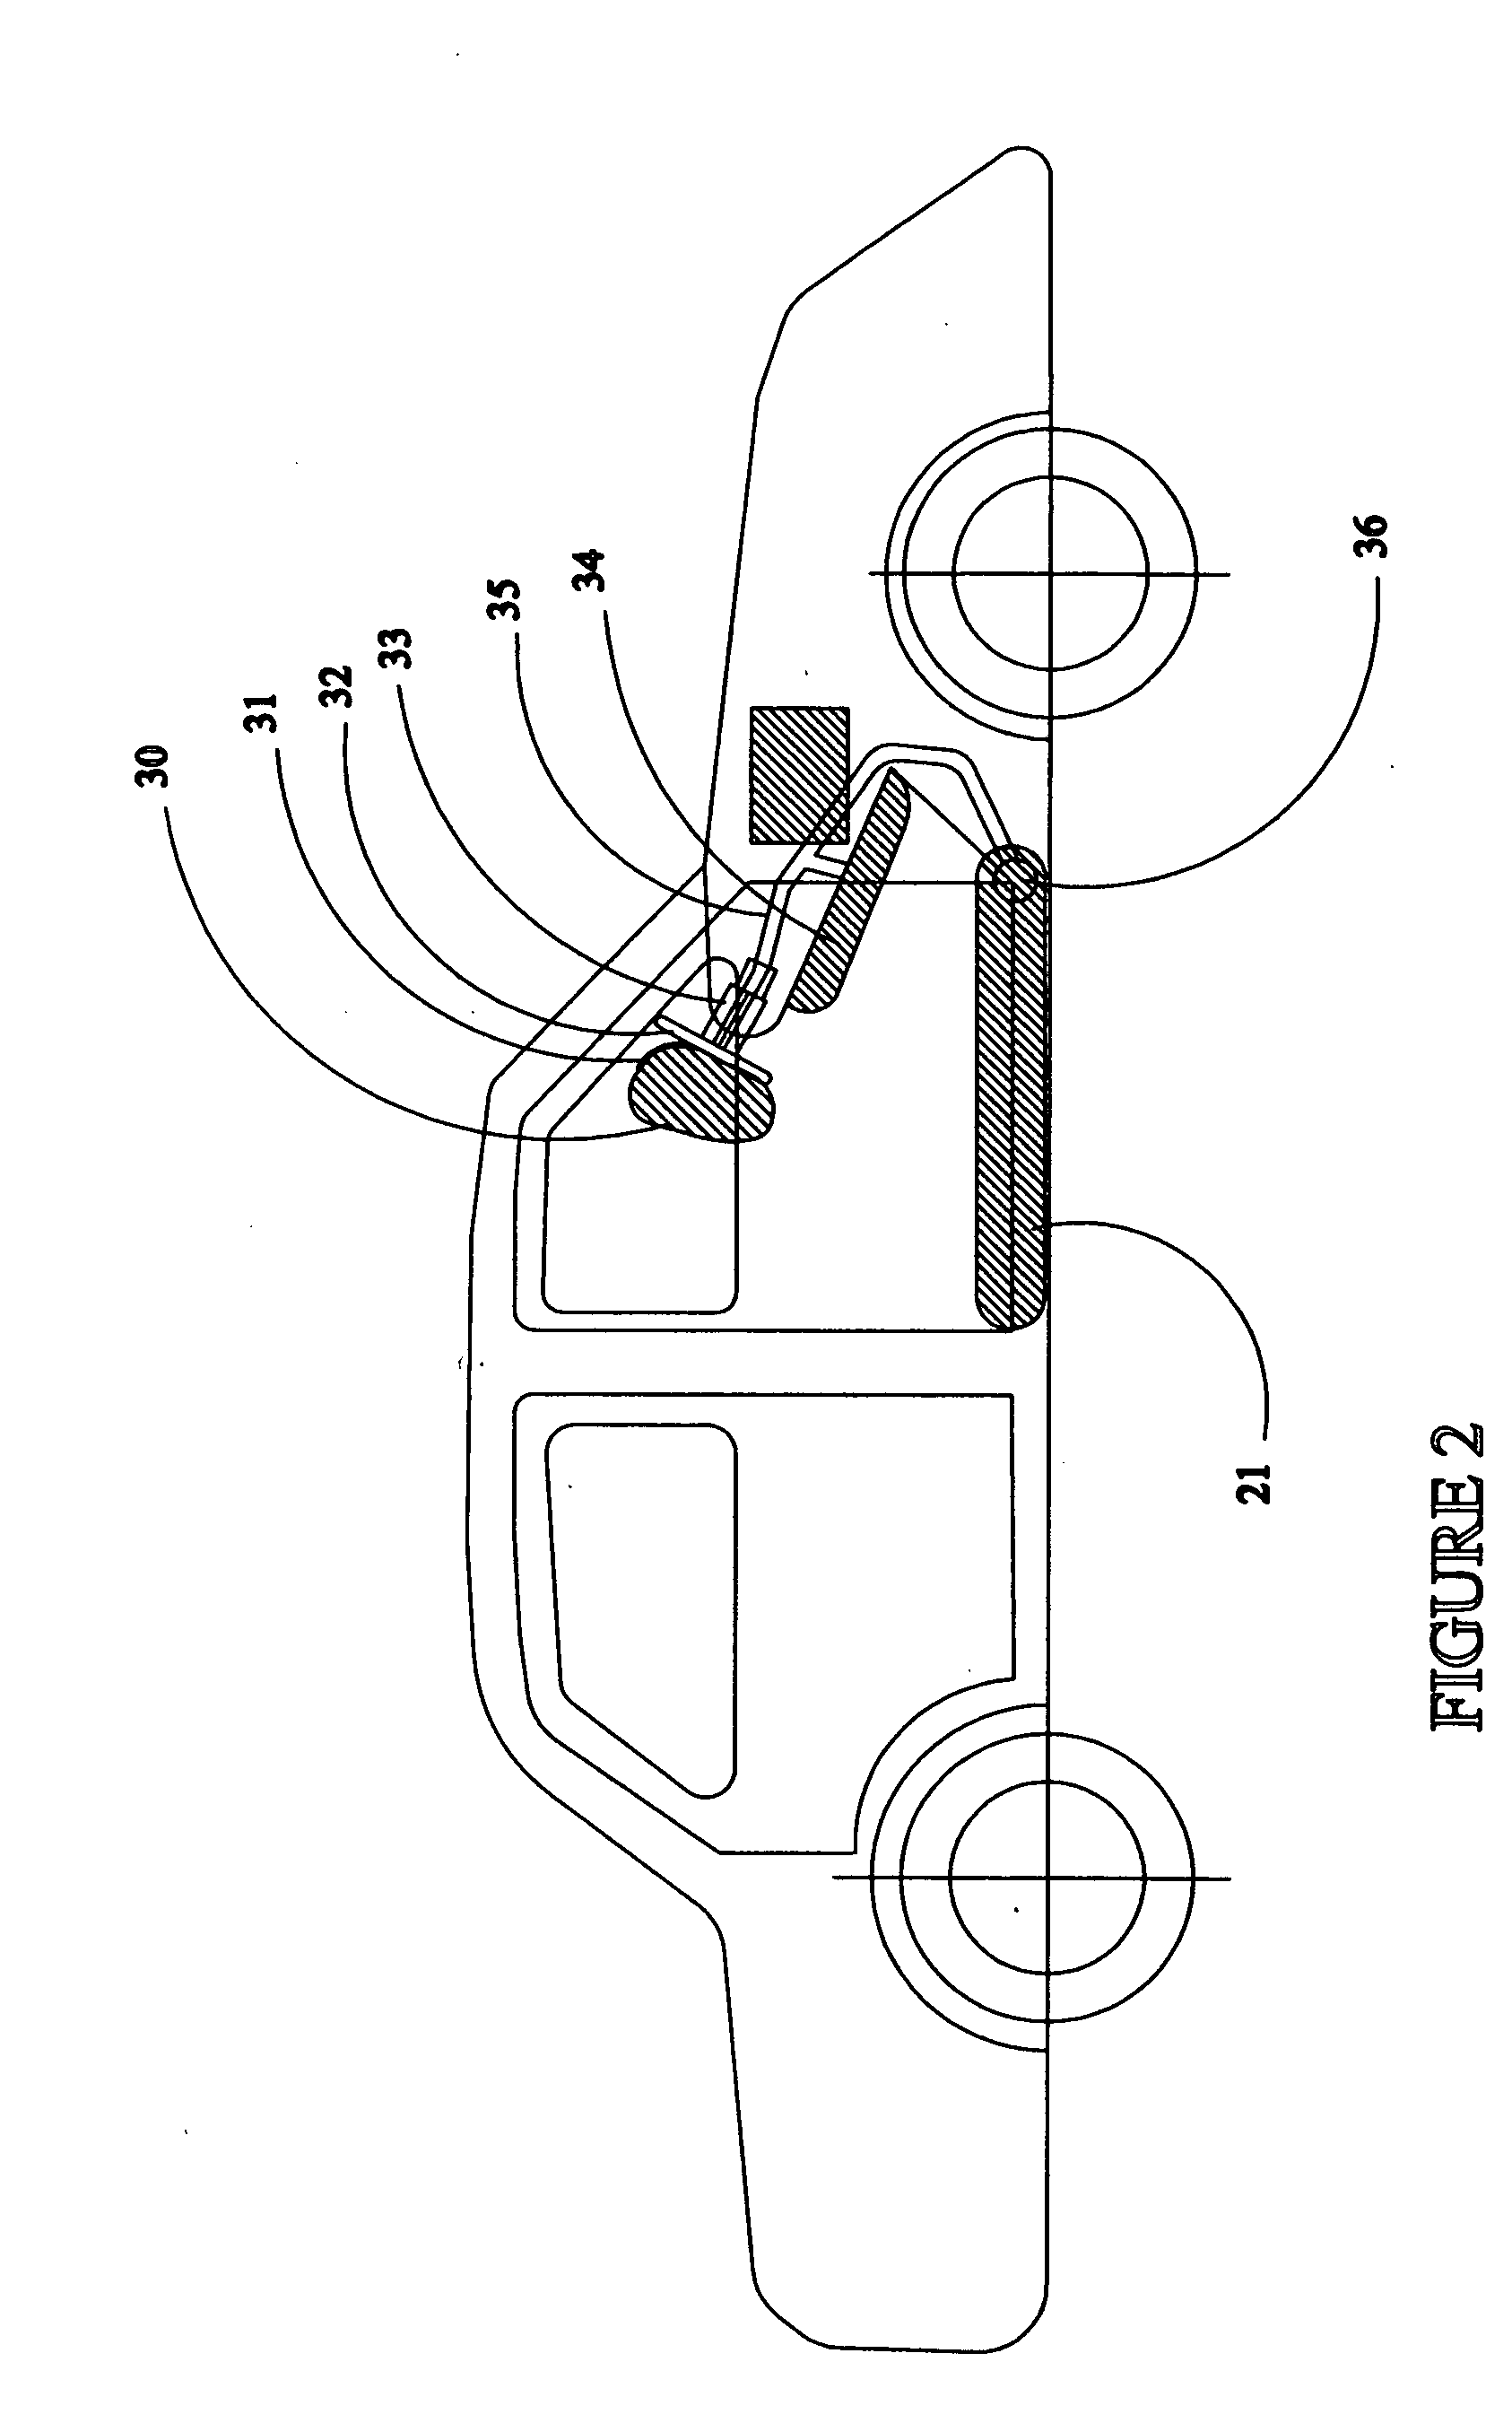 Restorable vehicle occupant safety system